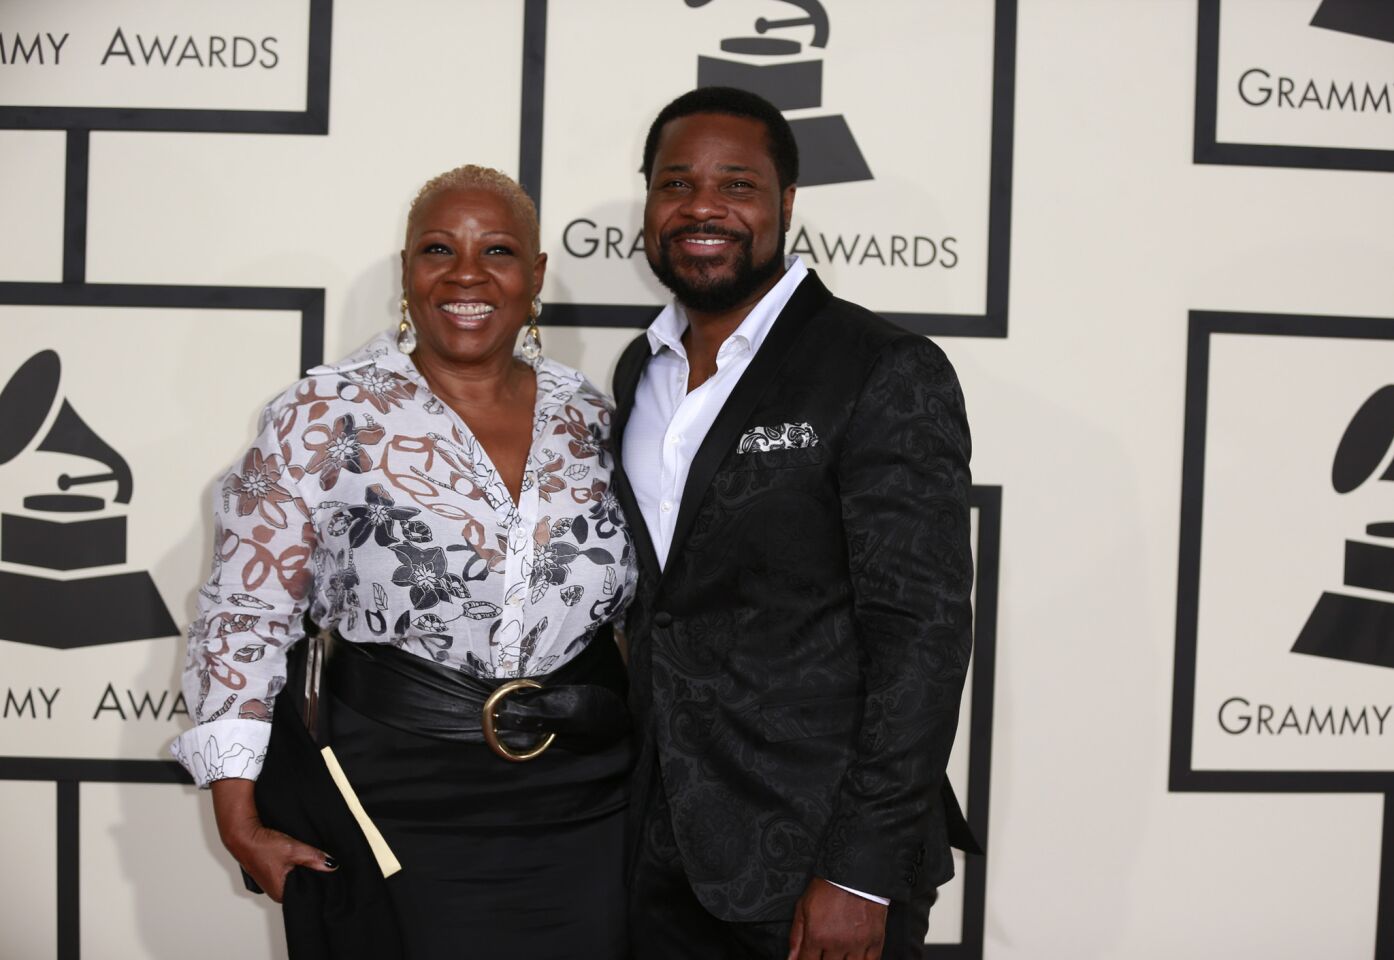 Actor Malcolm Jamal Warner and his mother (seen frequently at his side at such events), Pamela Warner.